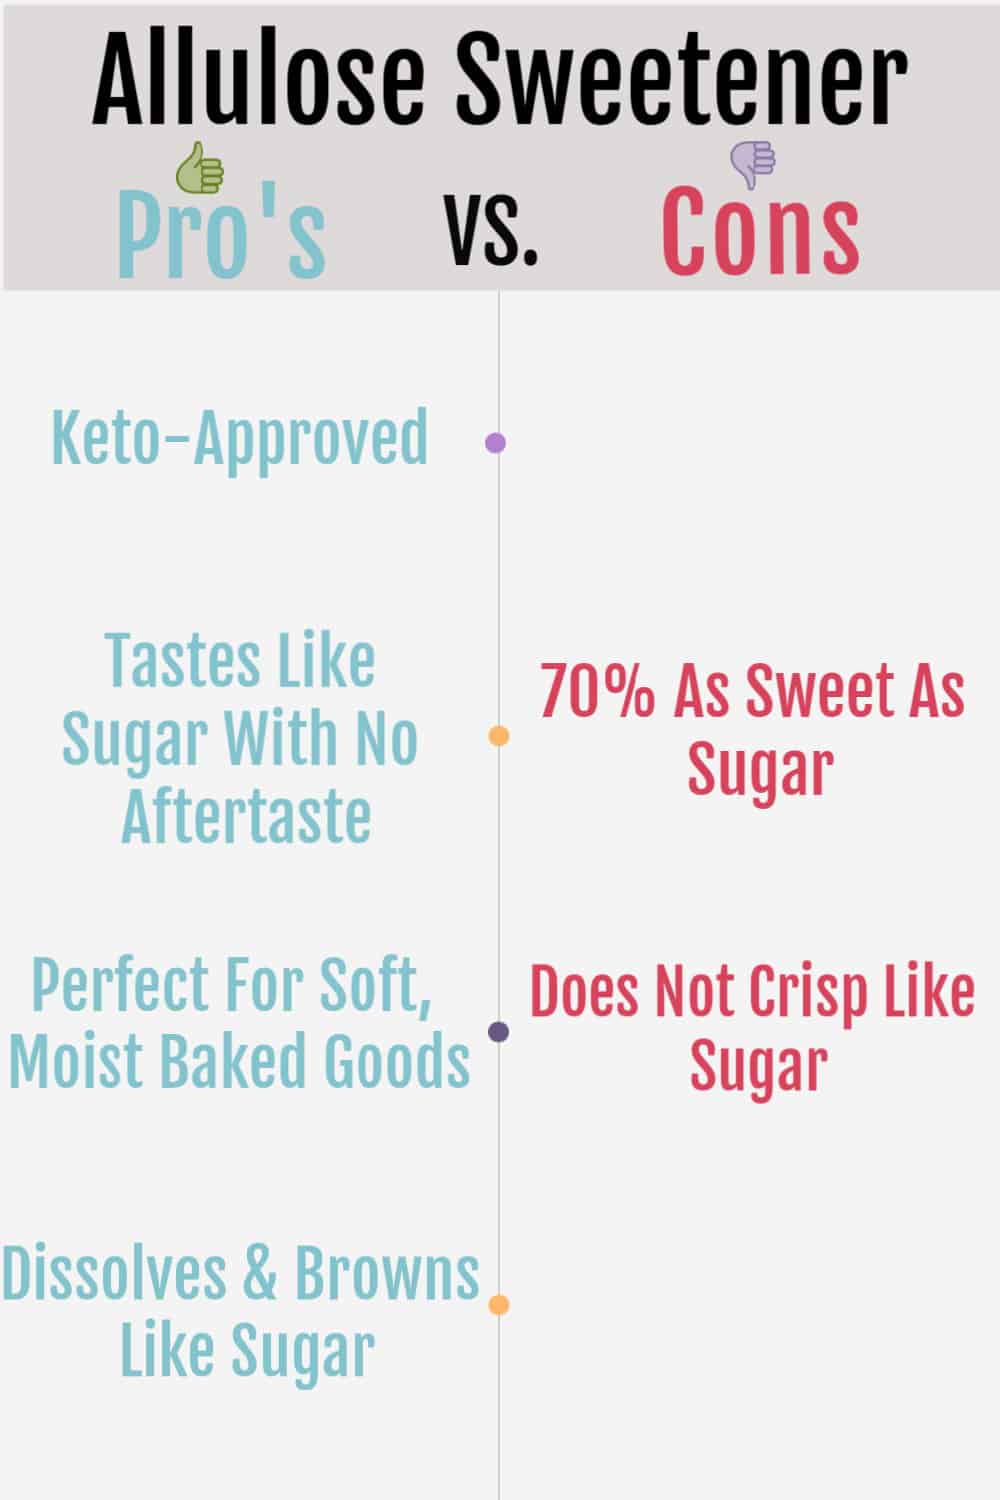 allulose pros and cons chart